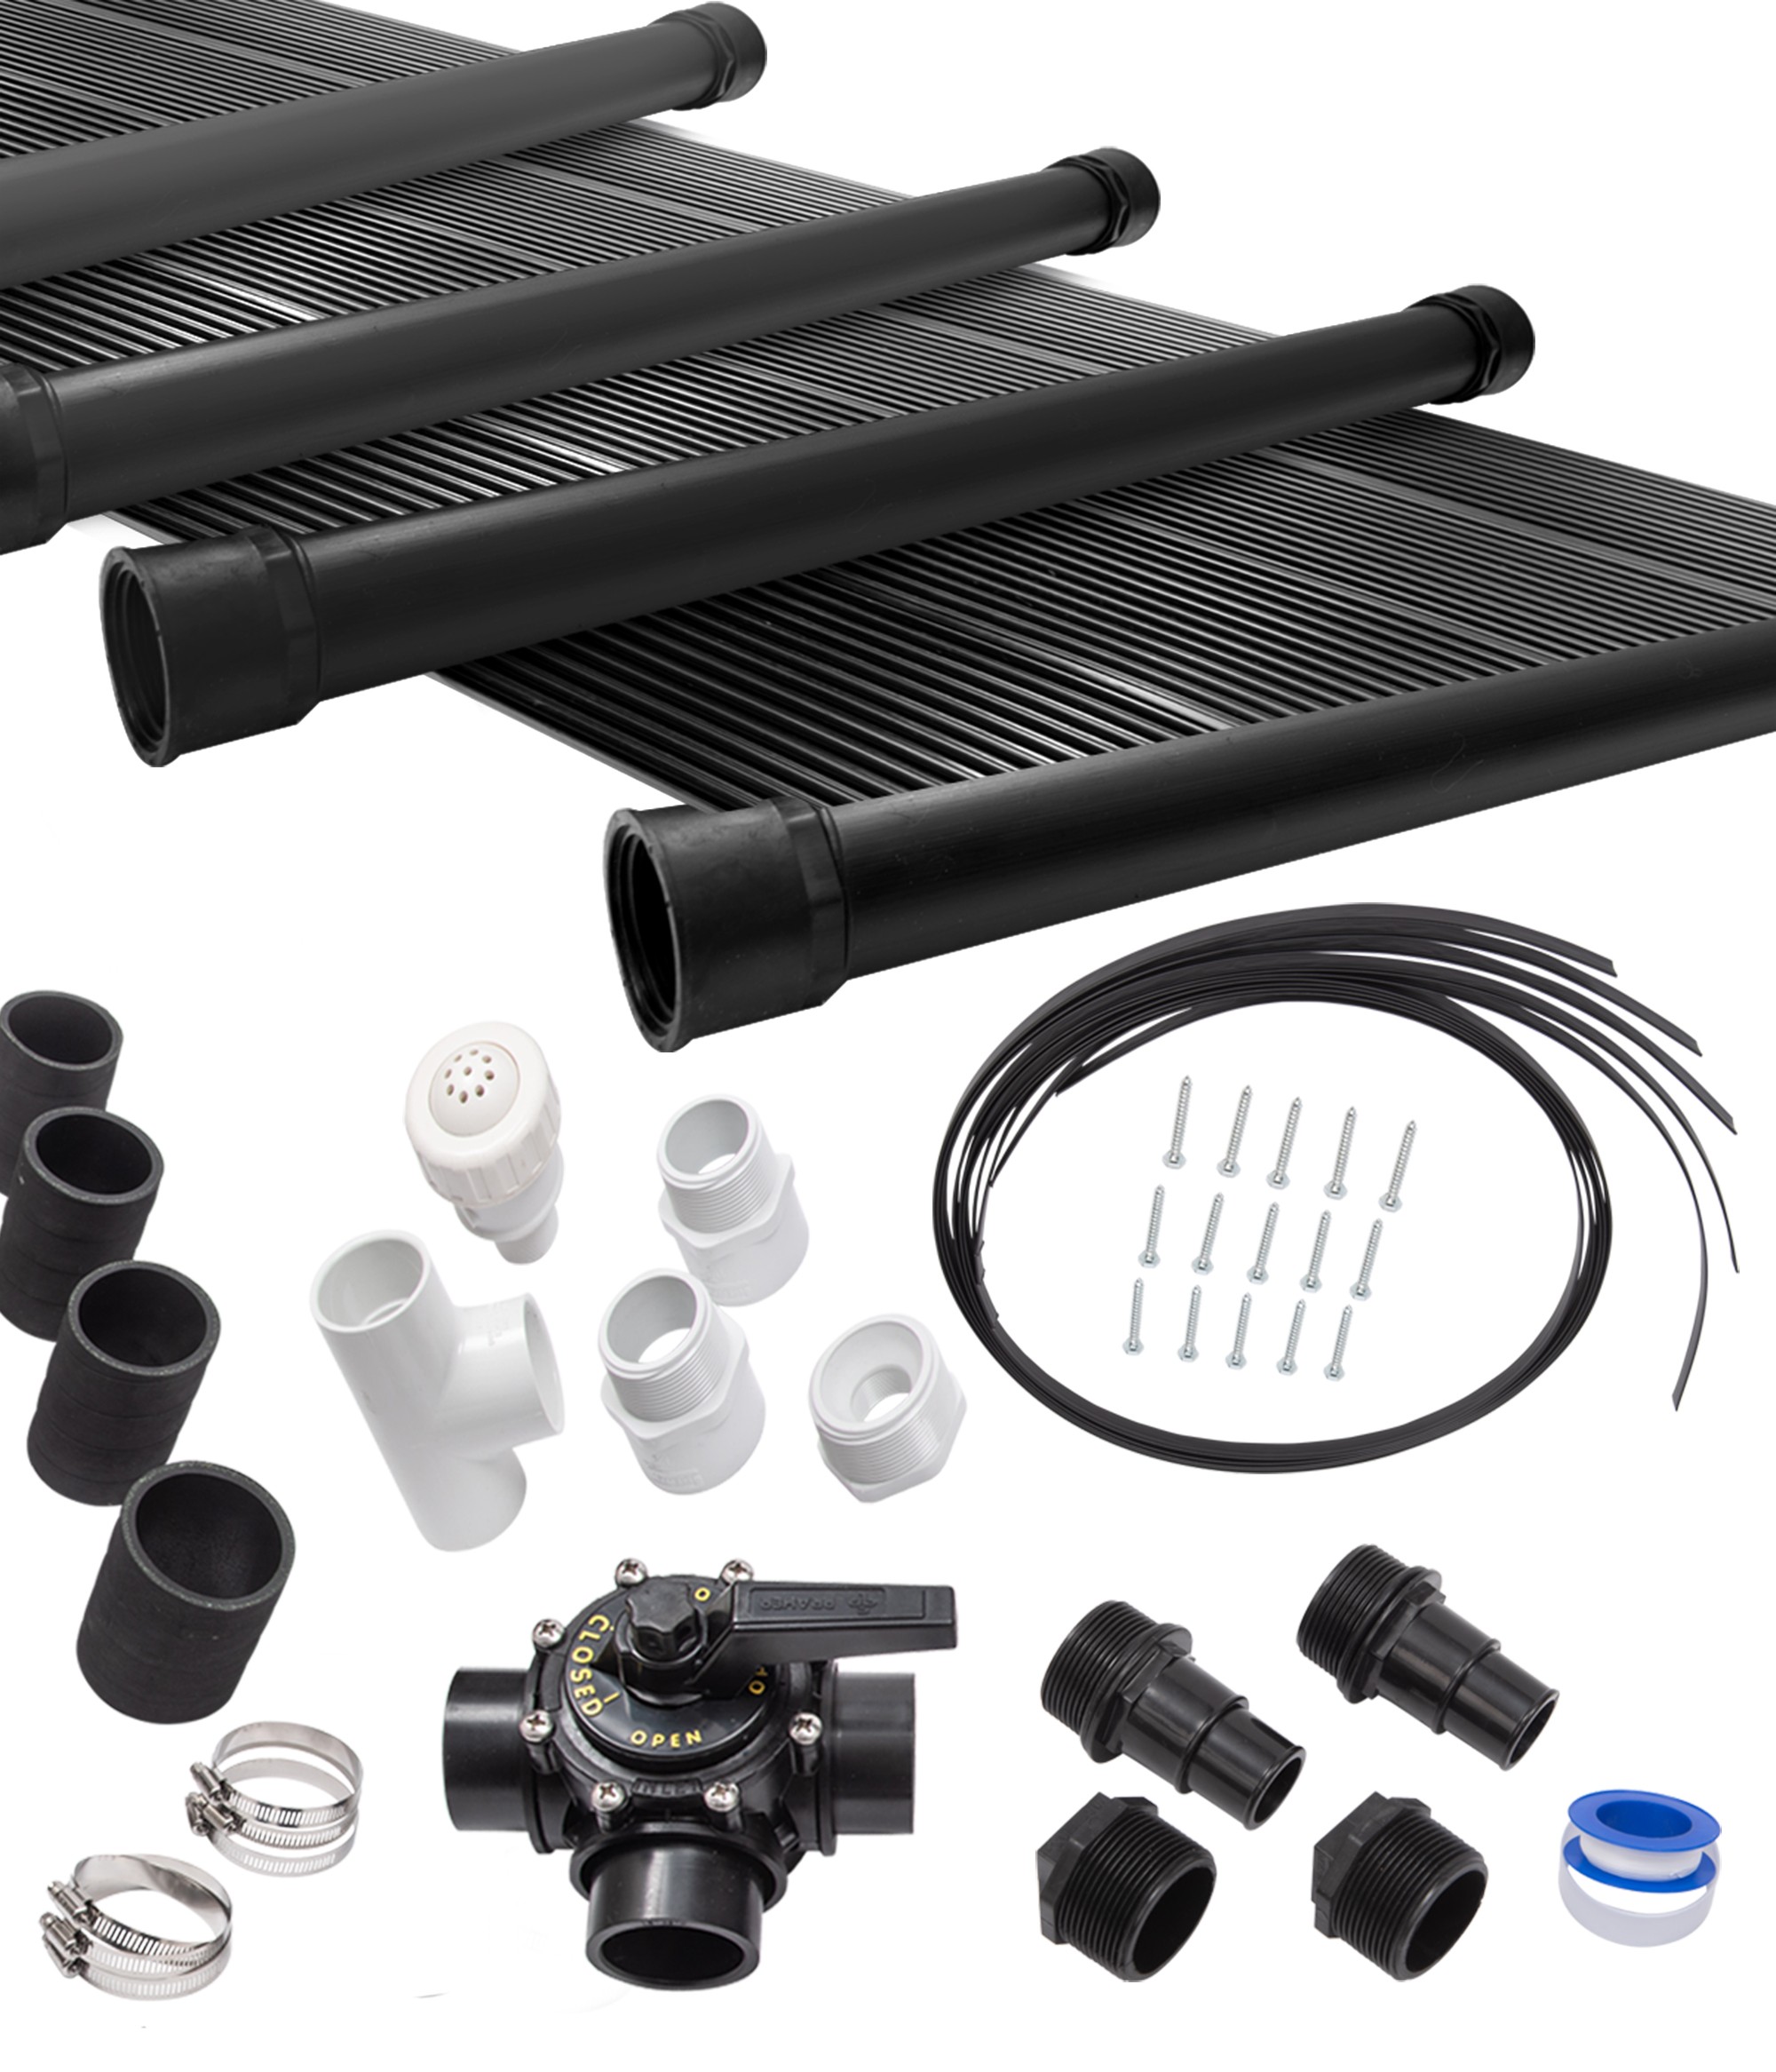 20-2X10' SunQuest Solar Swimming Pool Heater Complete System with Roof Kits